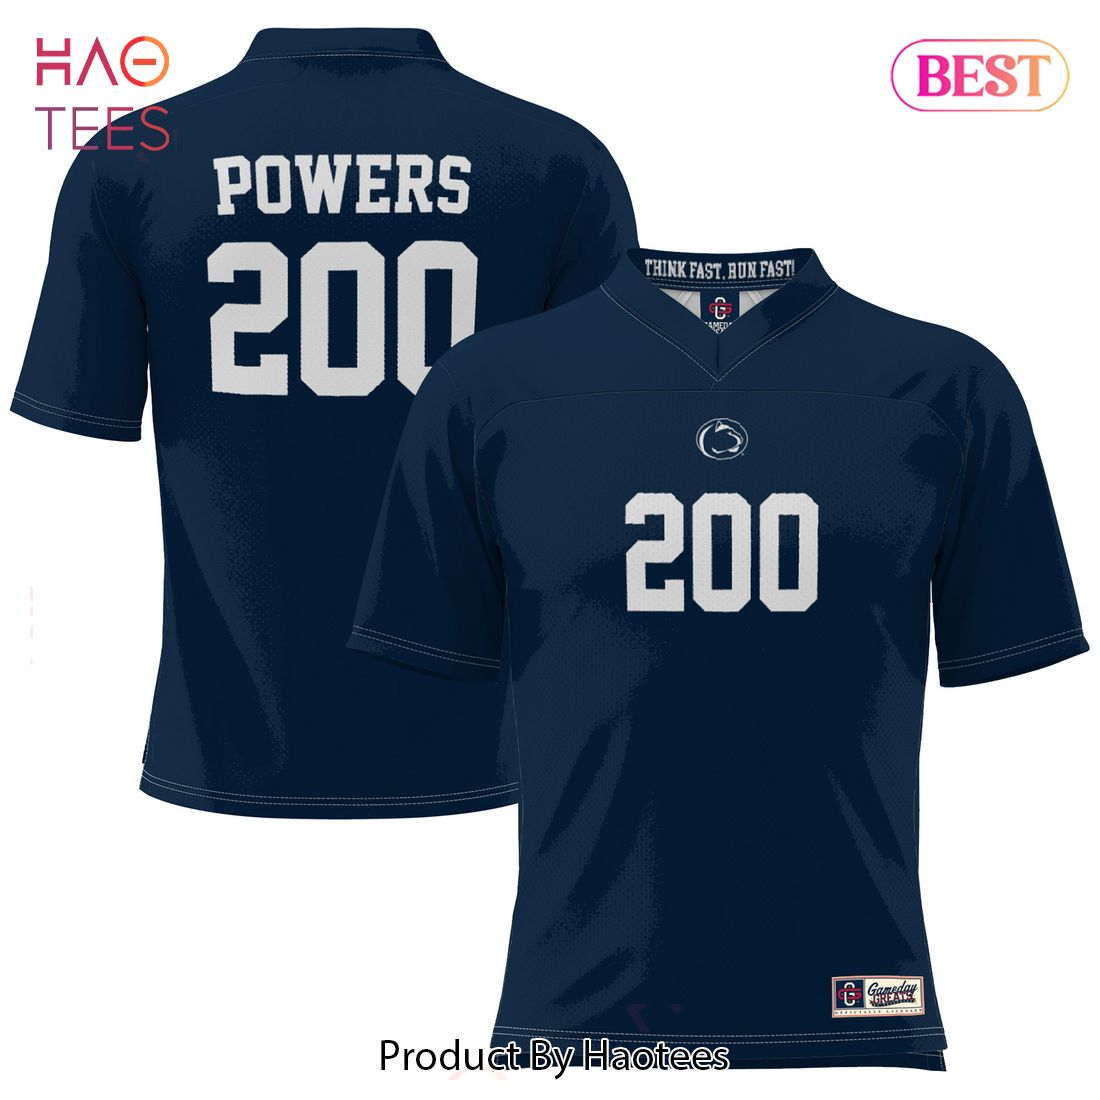 Chad Powers Penn State Nittany Lions ProSphere Football Jersey Navy